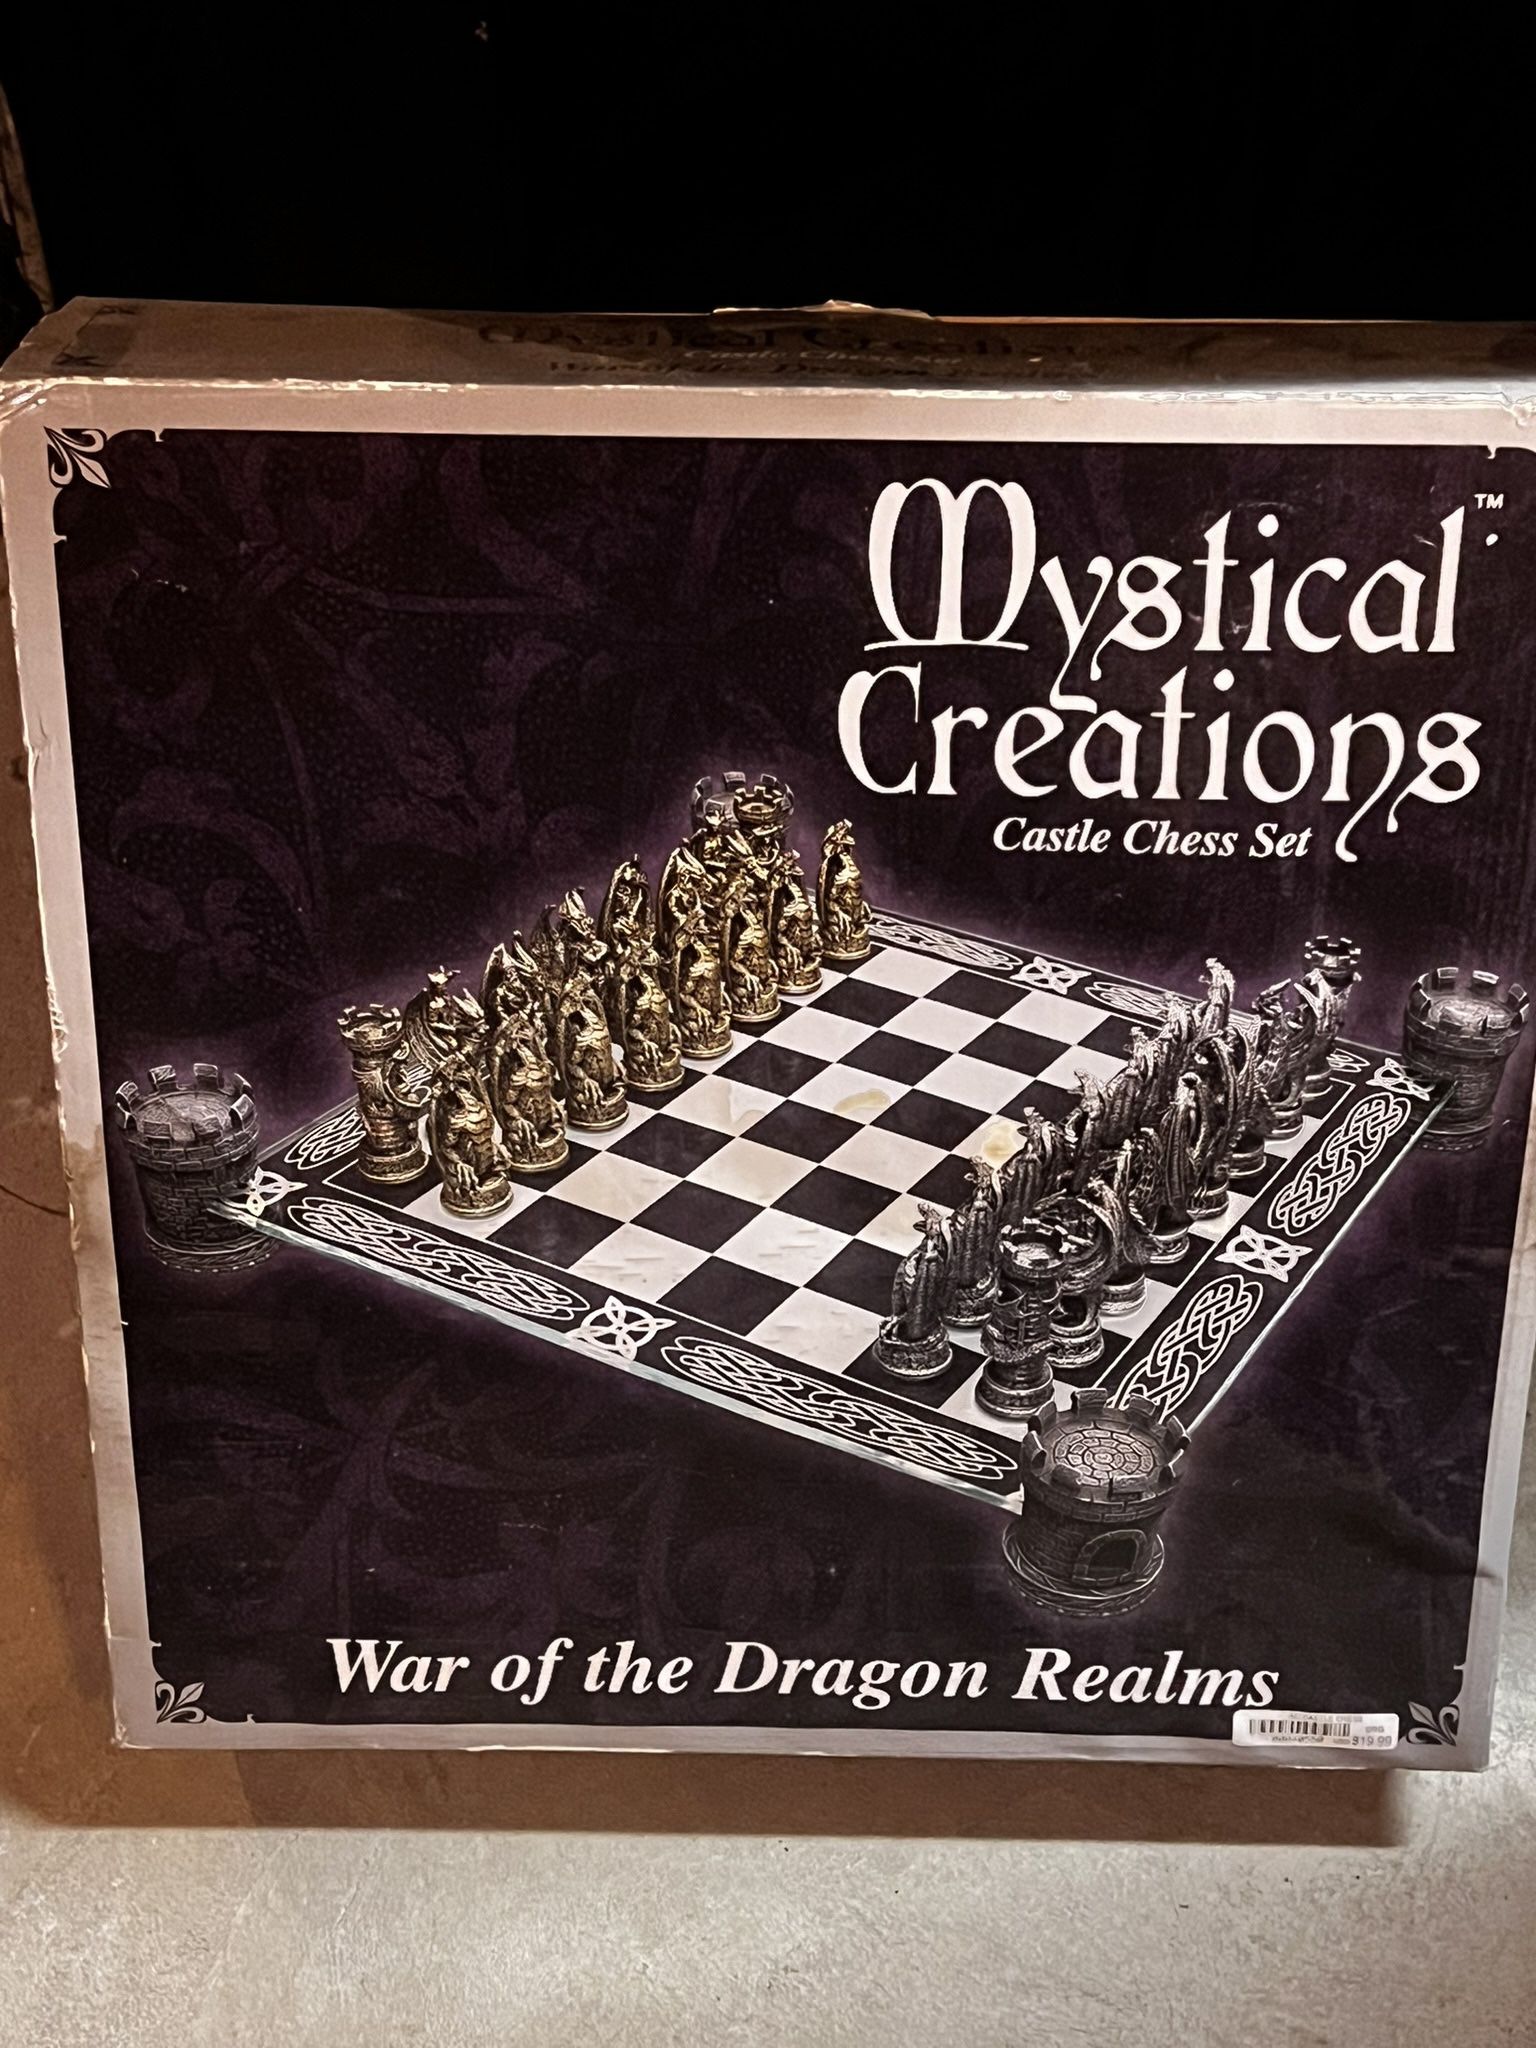 Mystical Creations Chess Set, War of the Dragon Realms